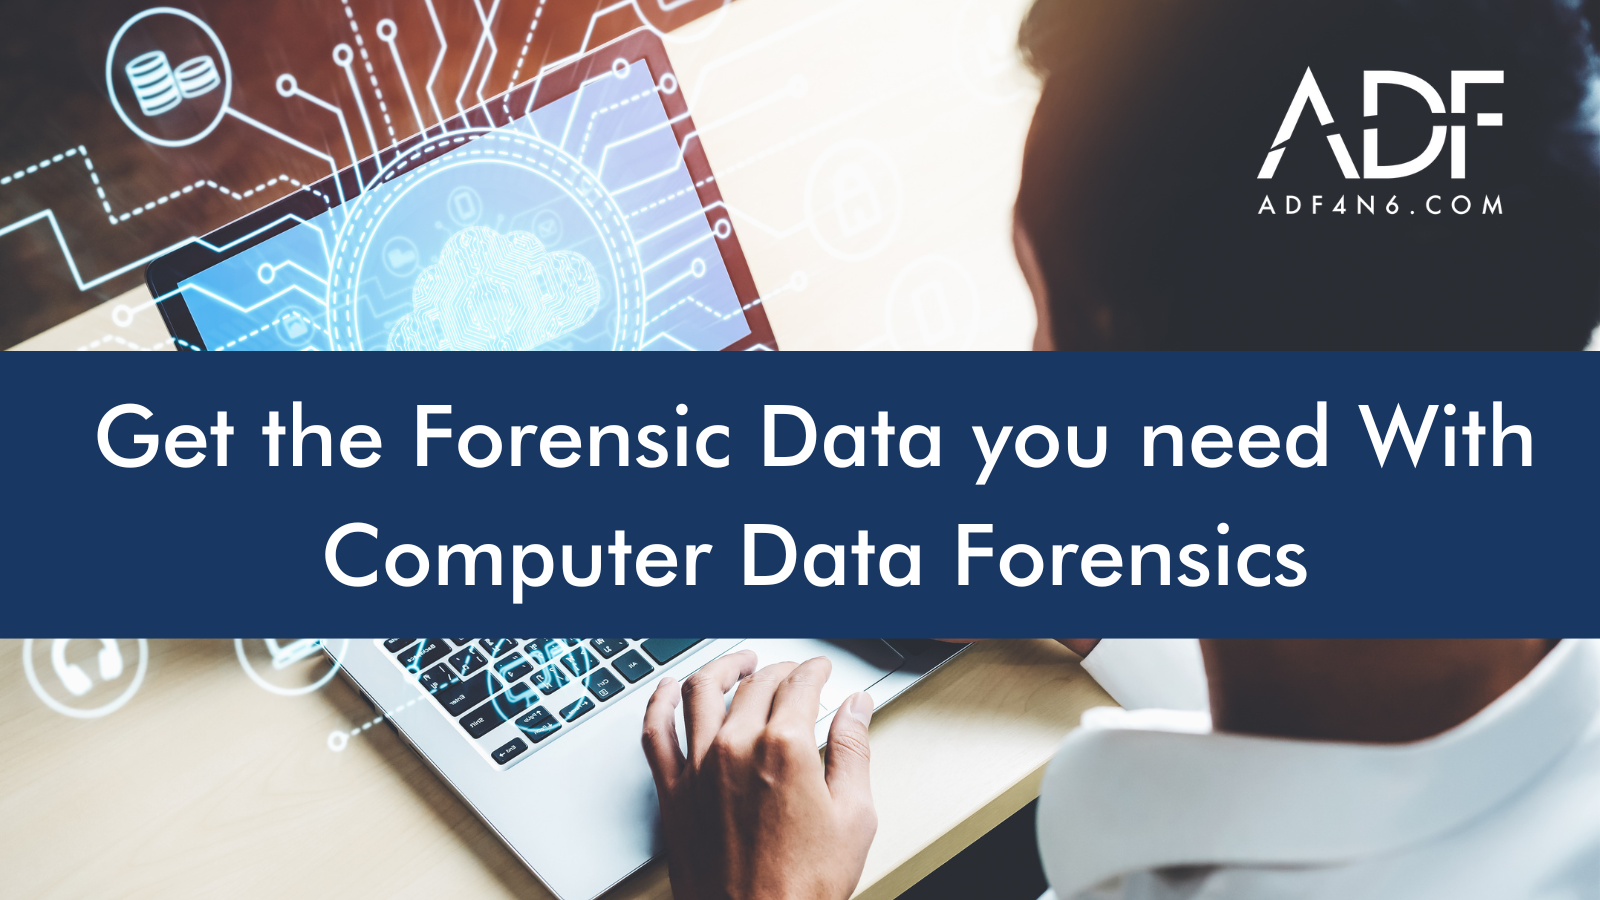 Get the Forensic Data you need With Computer Data Forensics